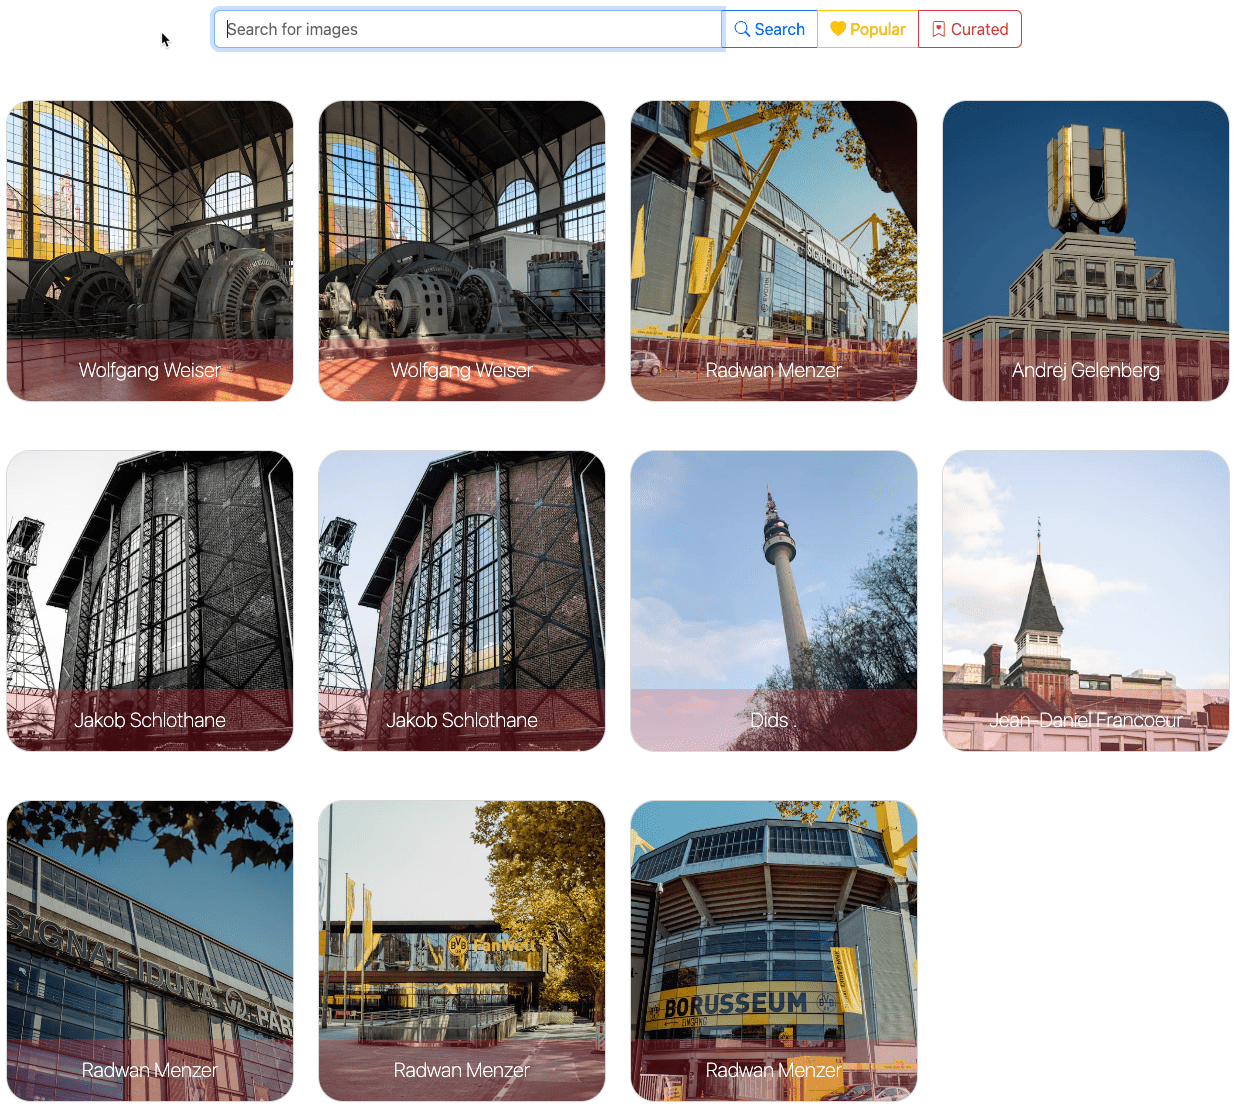 Finished image gallery in TMS WEB Core